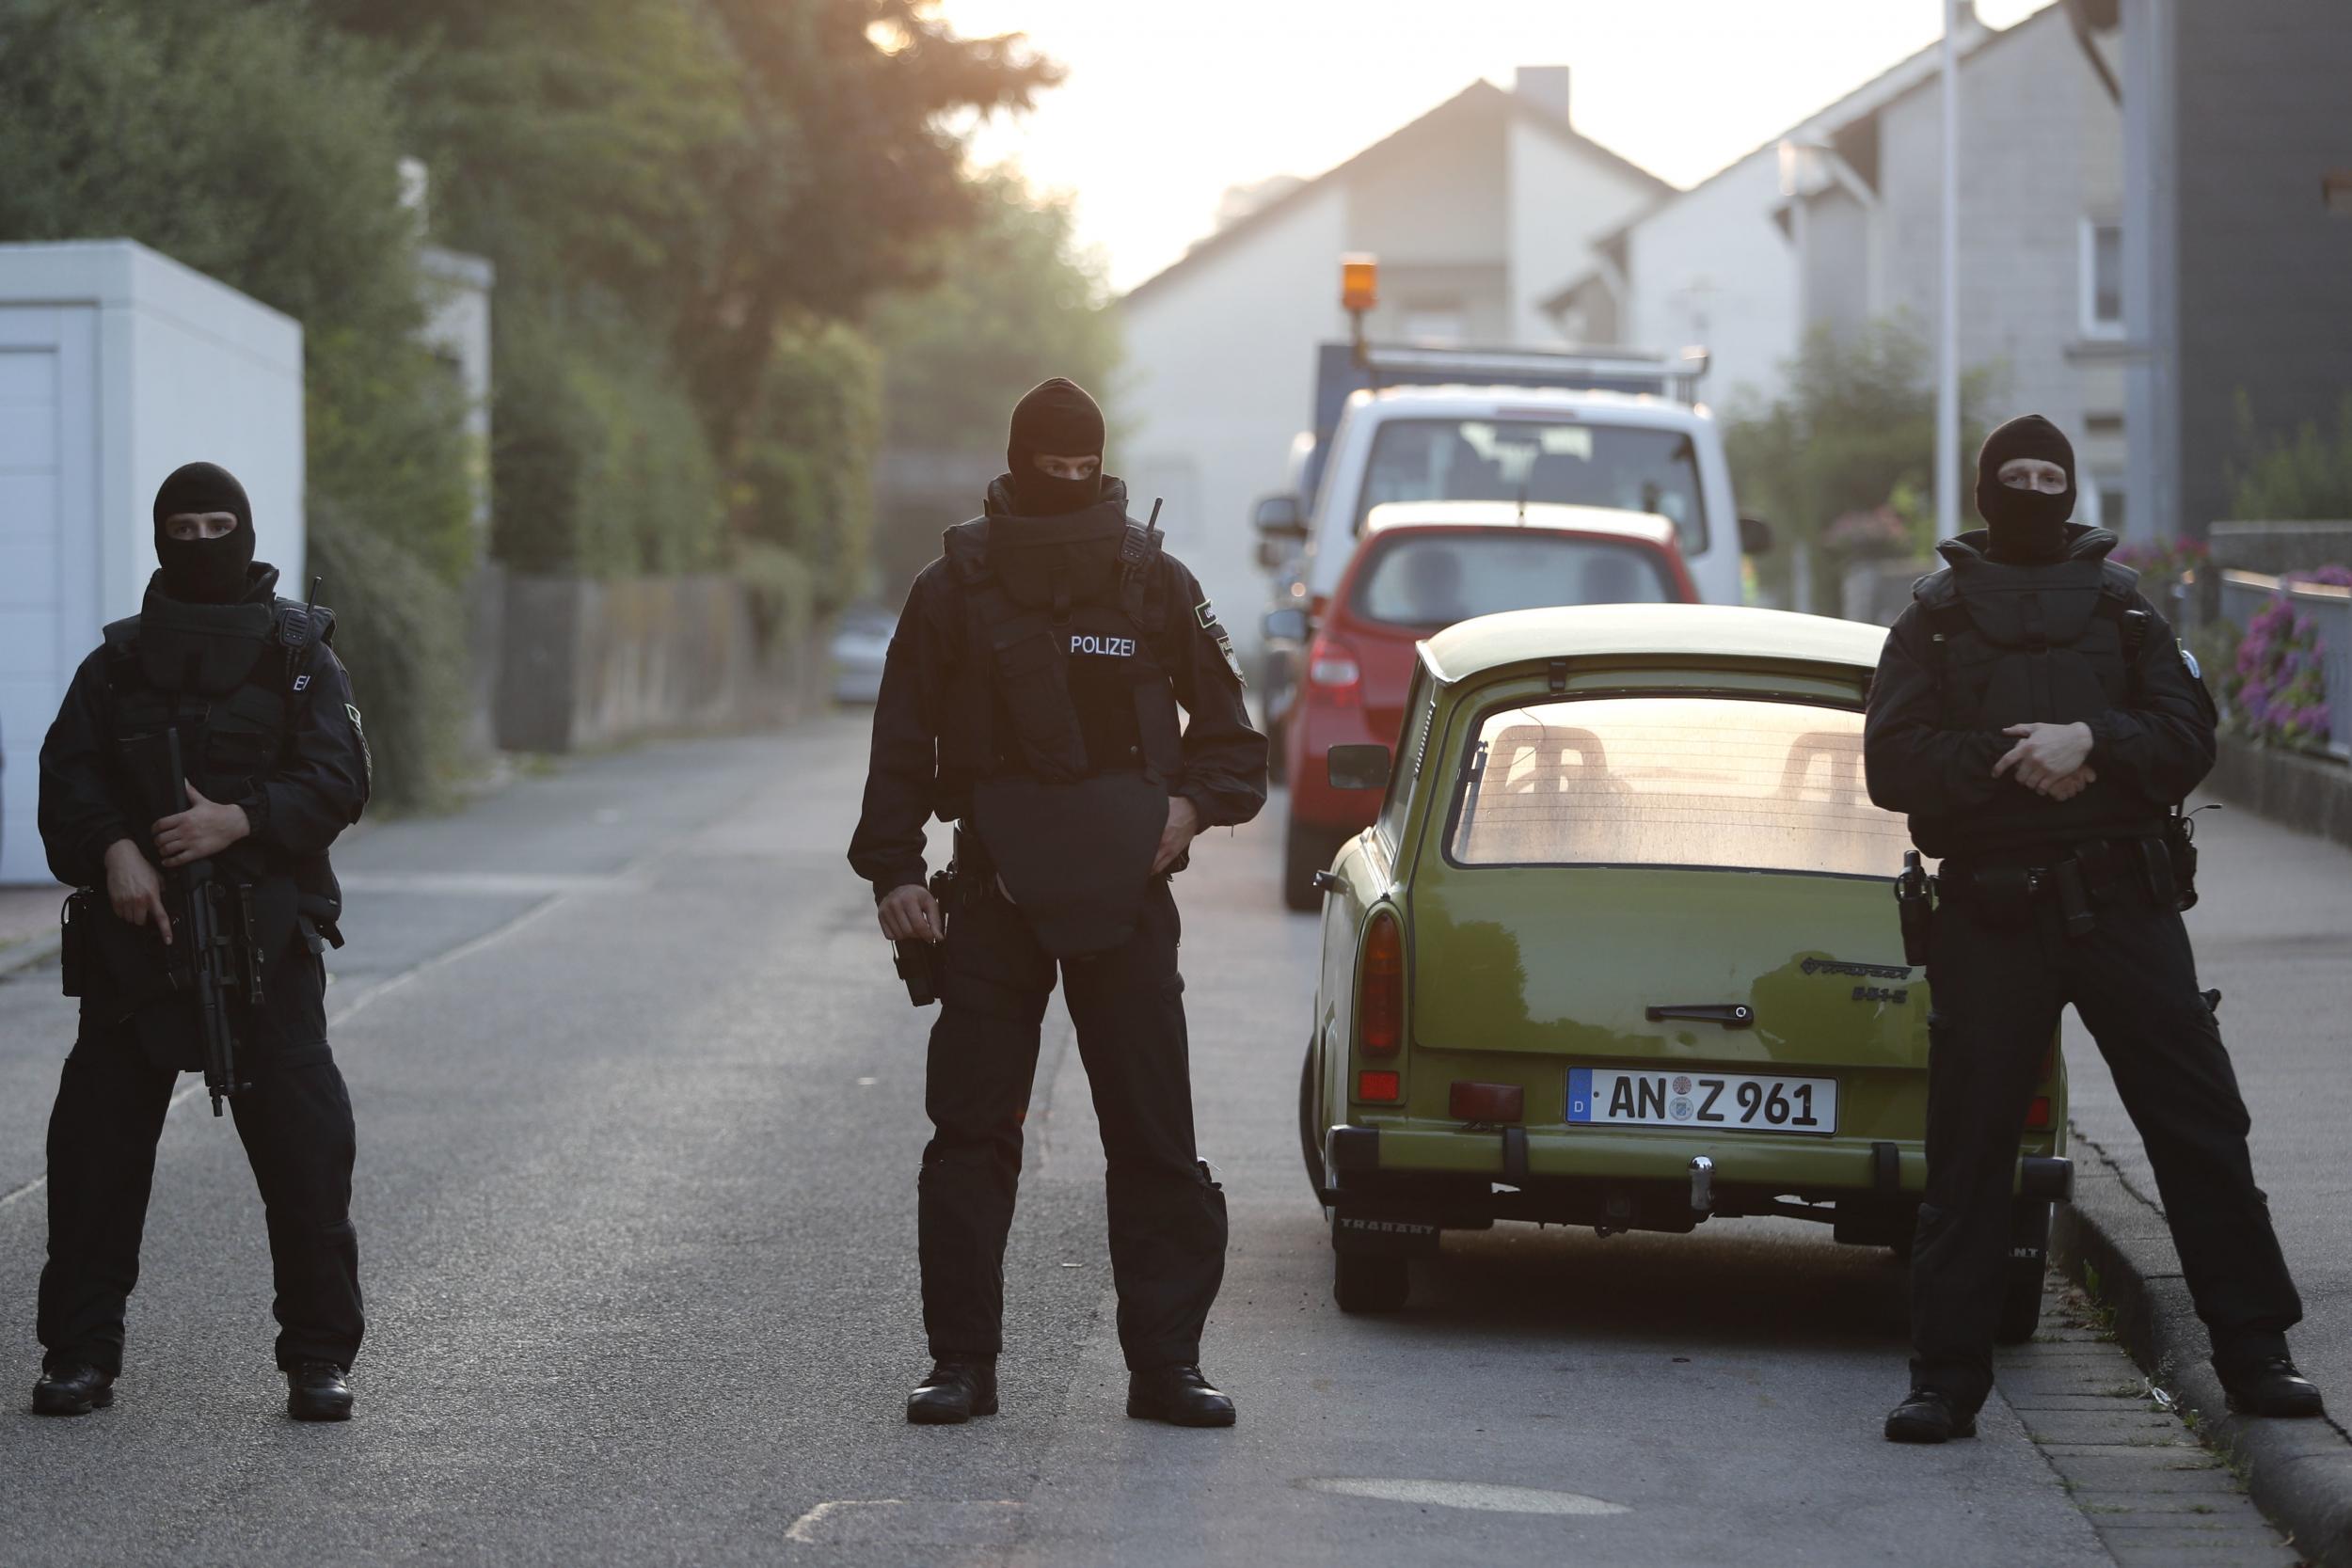 Special police officers secure a street near the house where a Syrian man lived before the explosion in Ansbach